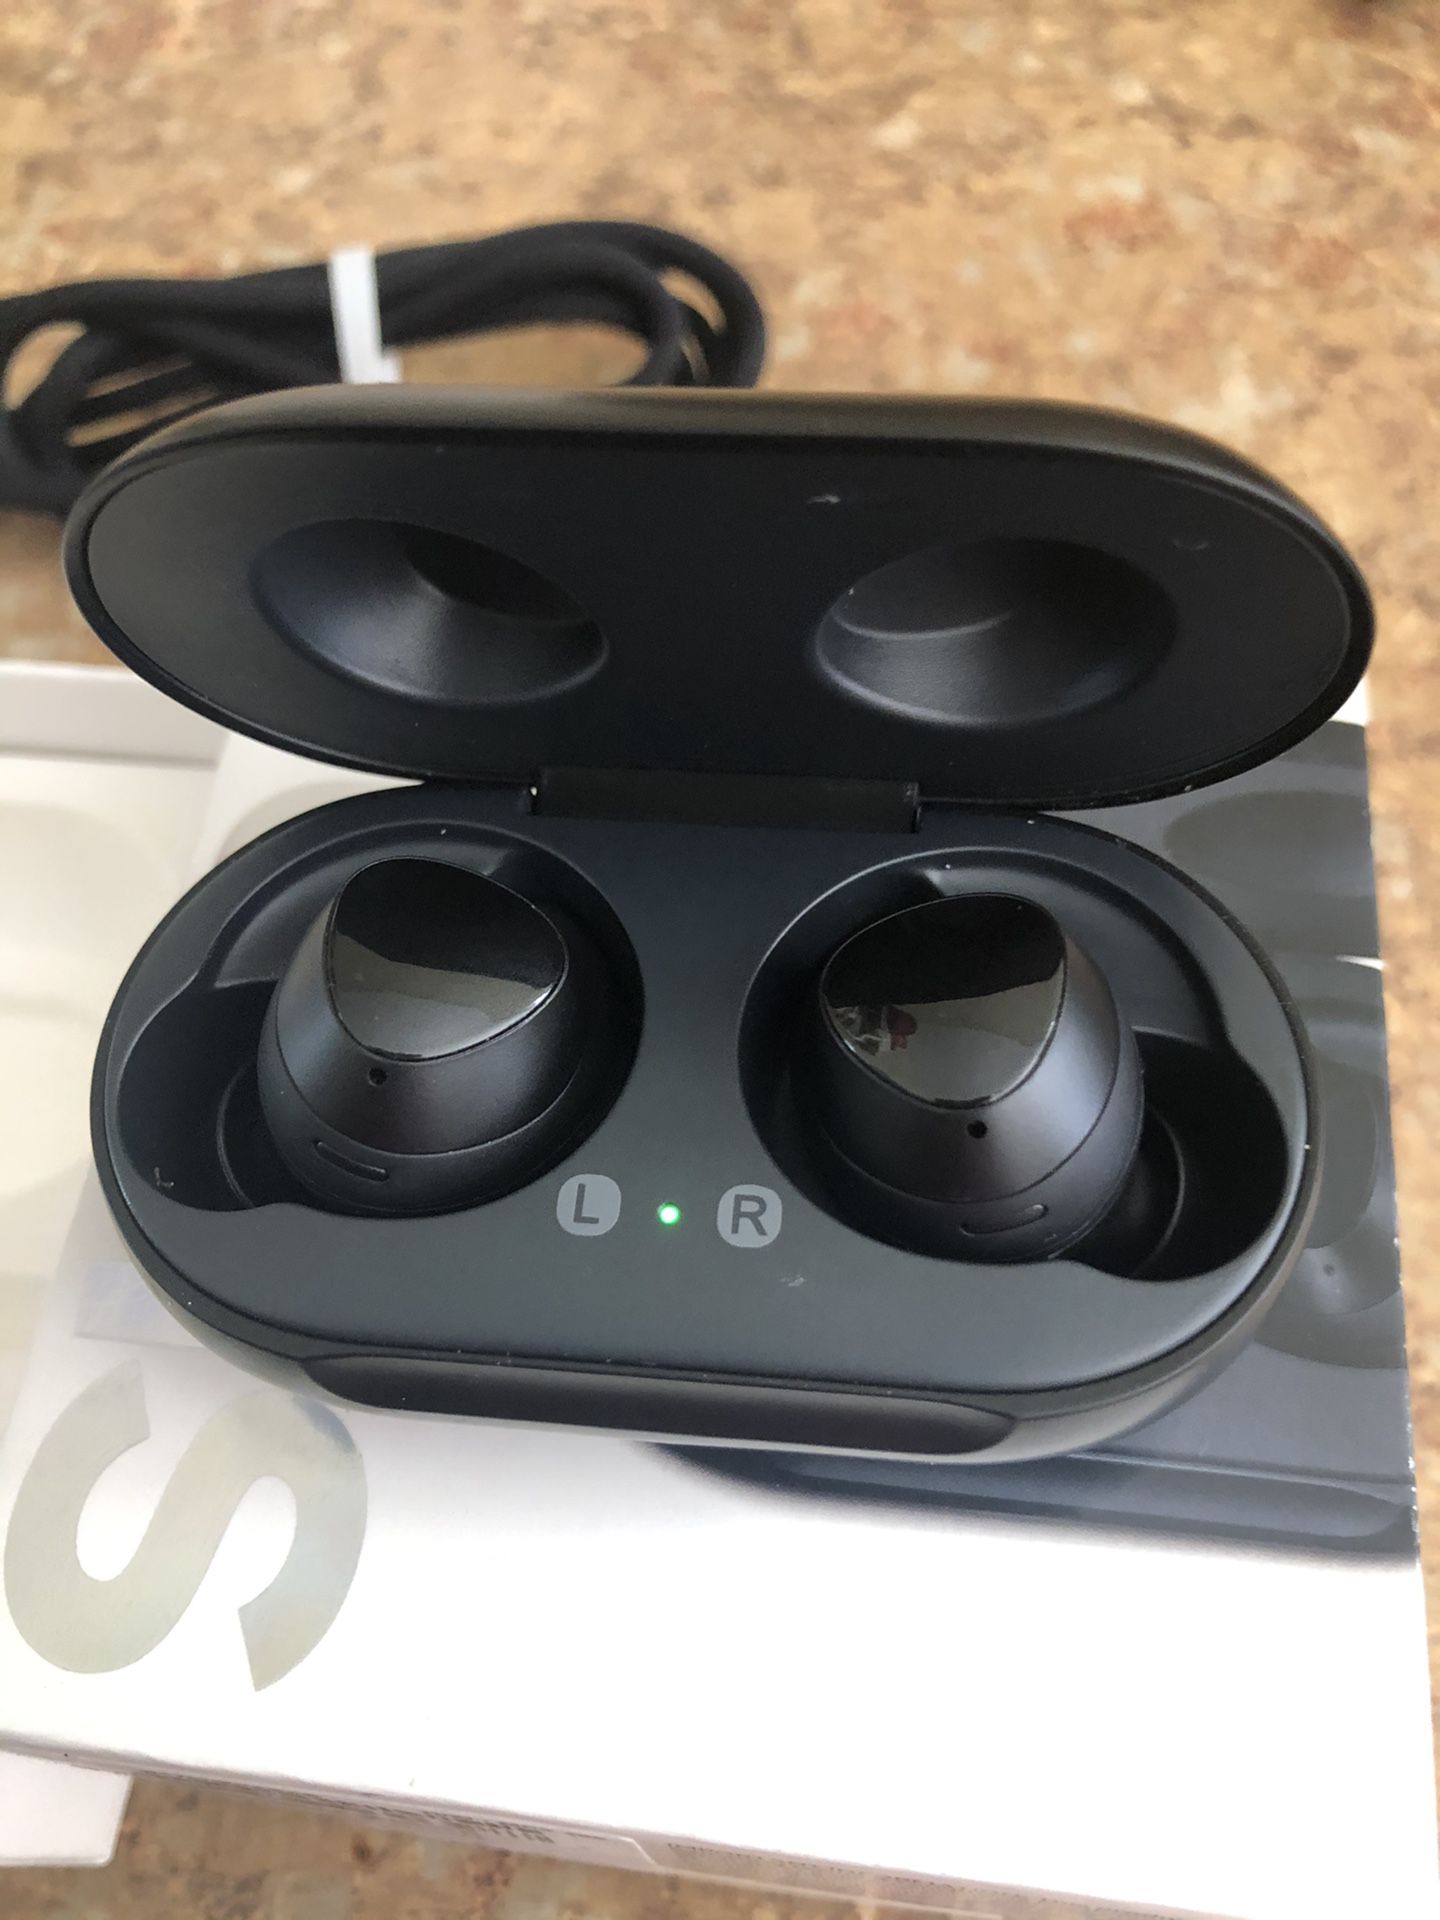 Samsung Galaxy Buds True Wireless In-Ear Bluetooth Headphones Black SM-R170 2019 Good condition with minor scratches